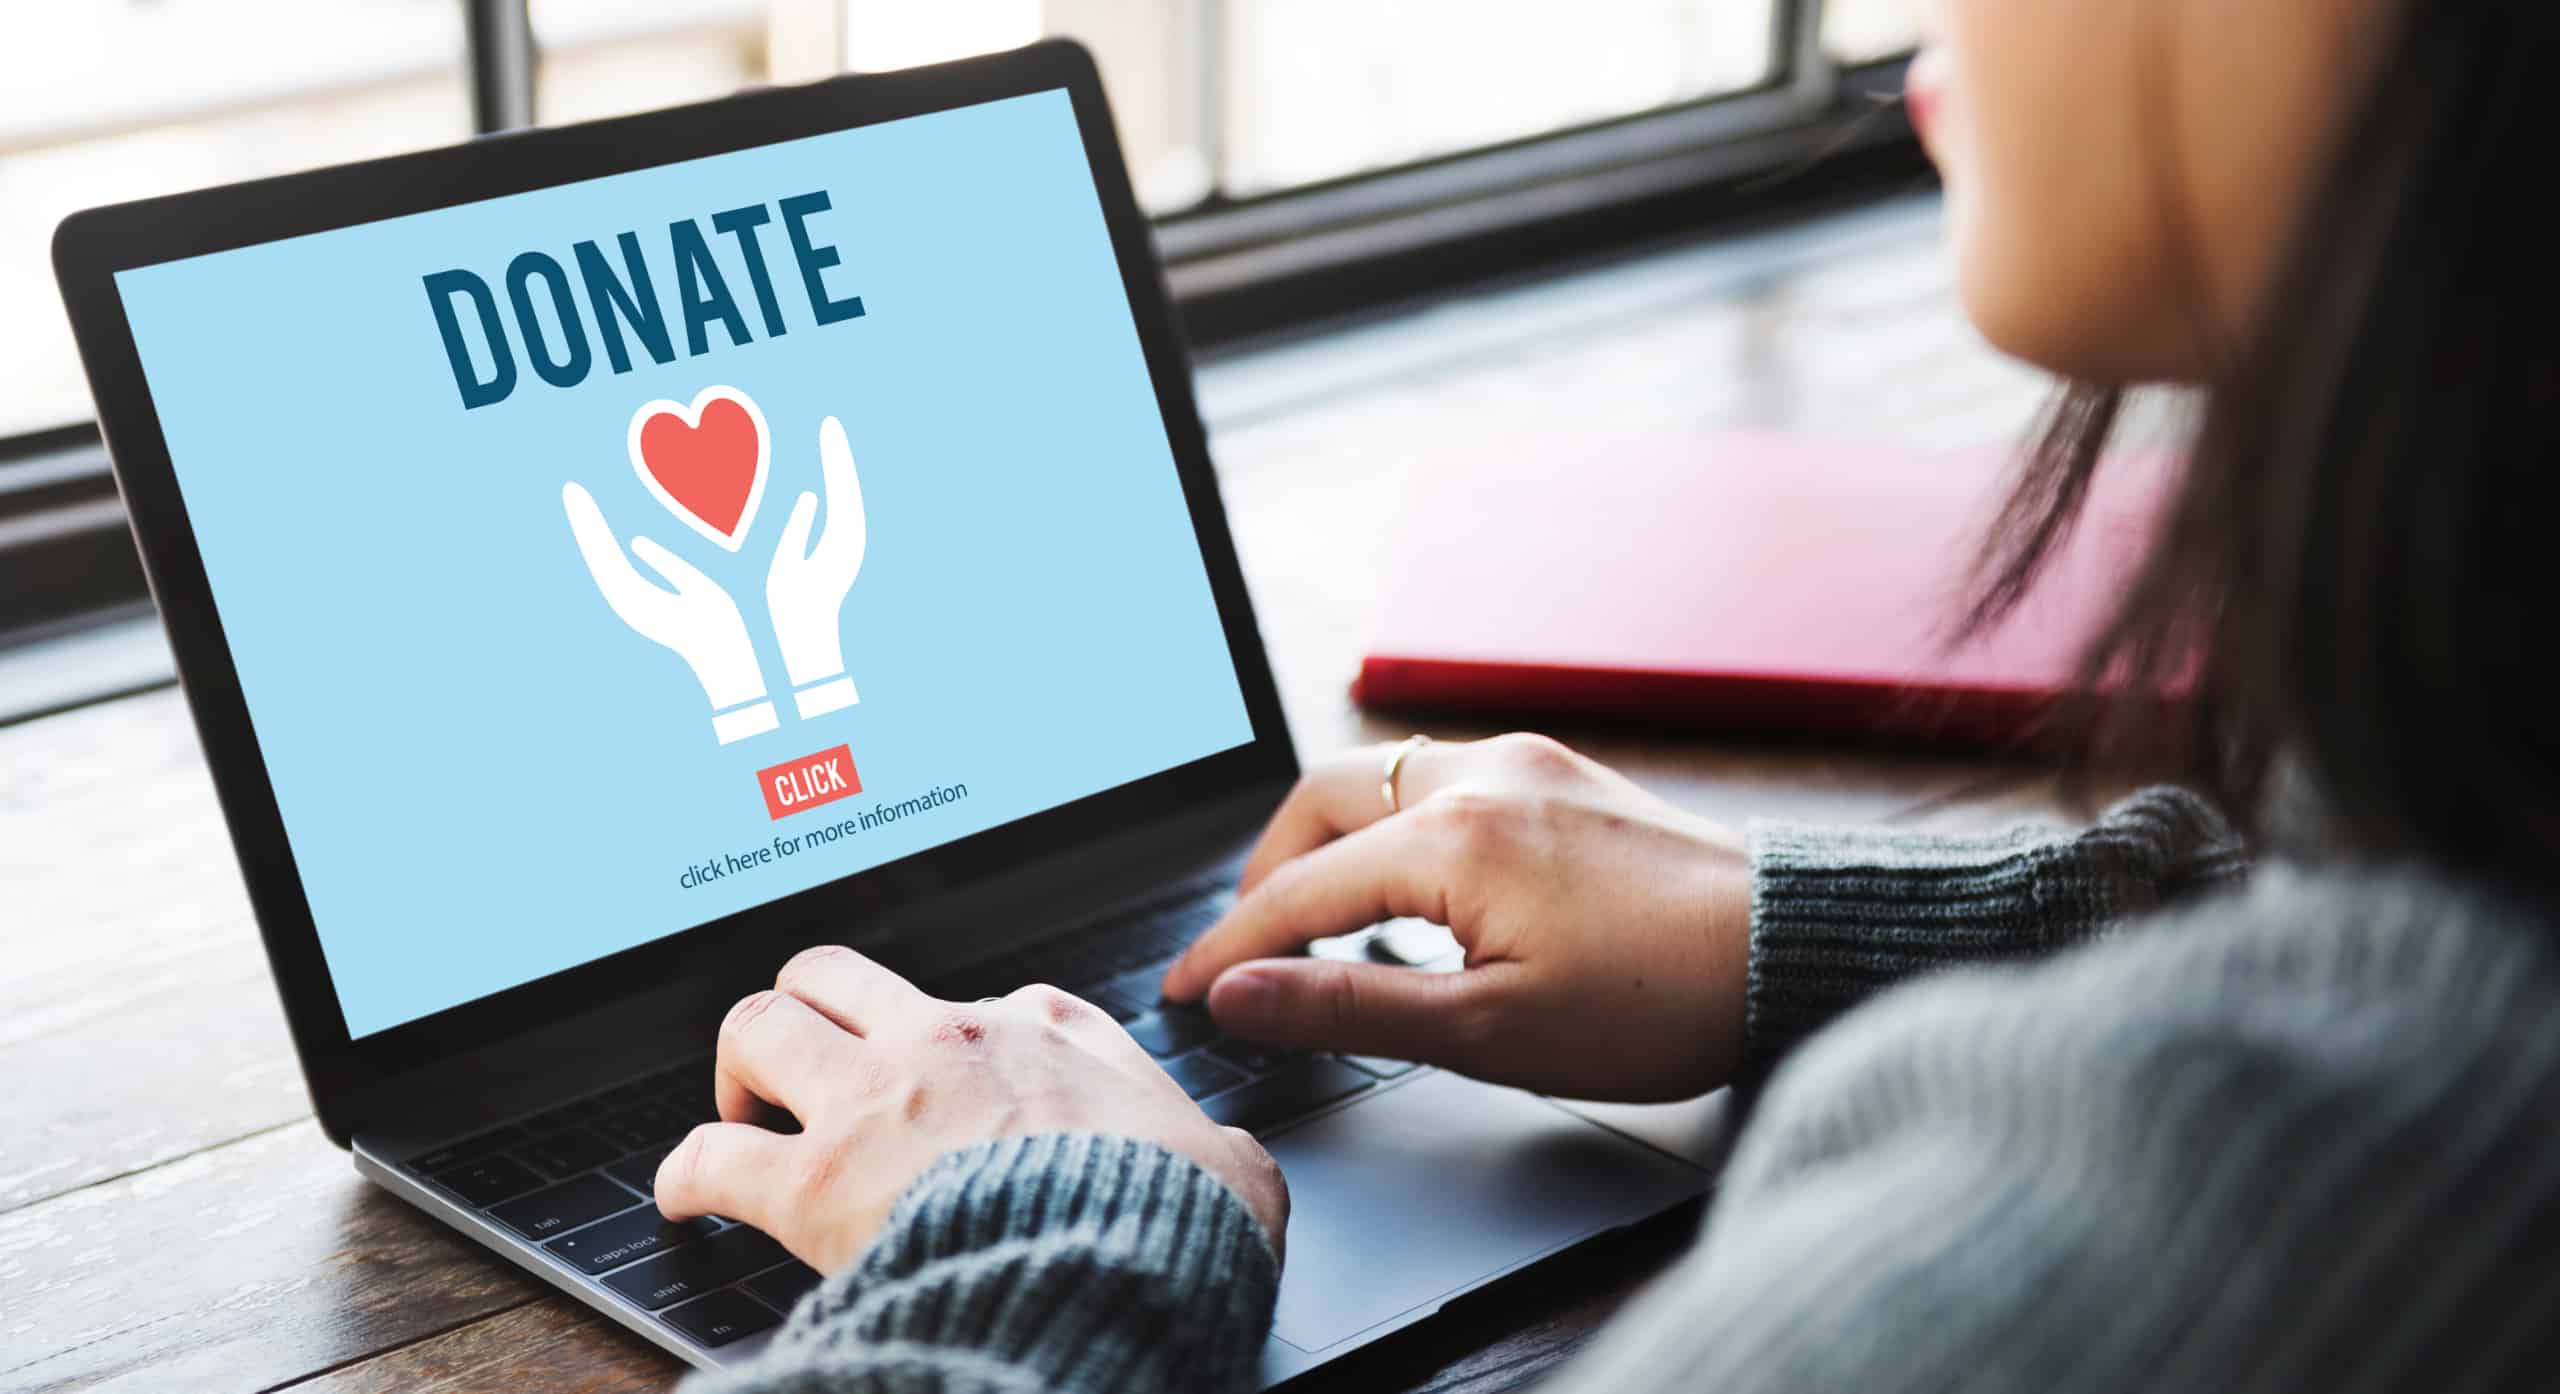 Making your end-of-year donation online